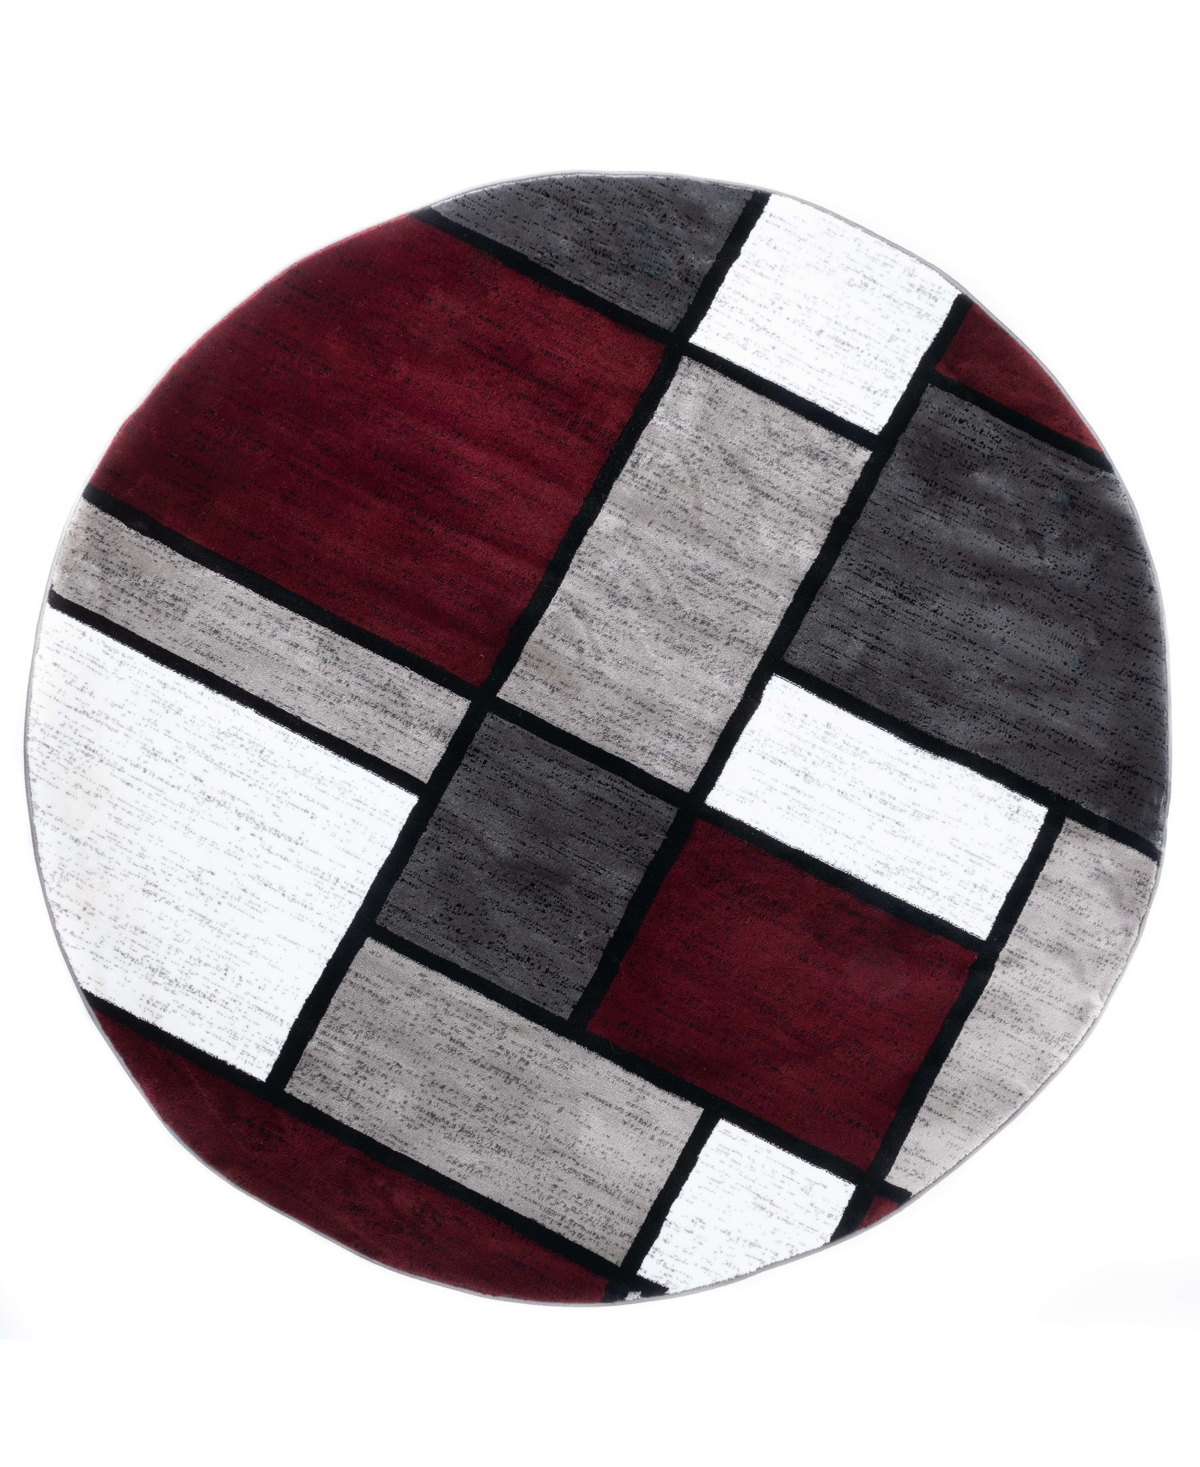 Main Street Rugs Montane 106 6'6" X 6'6" Round Area Rug In Red